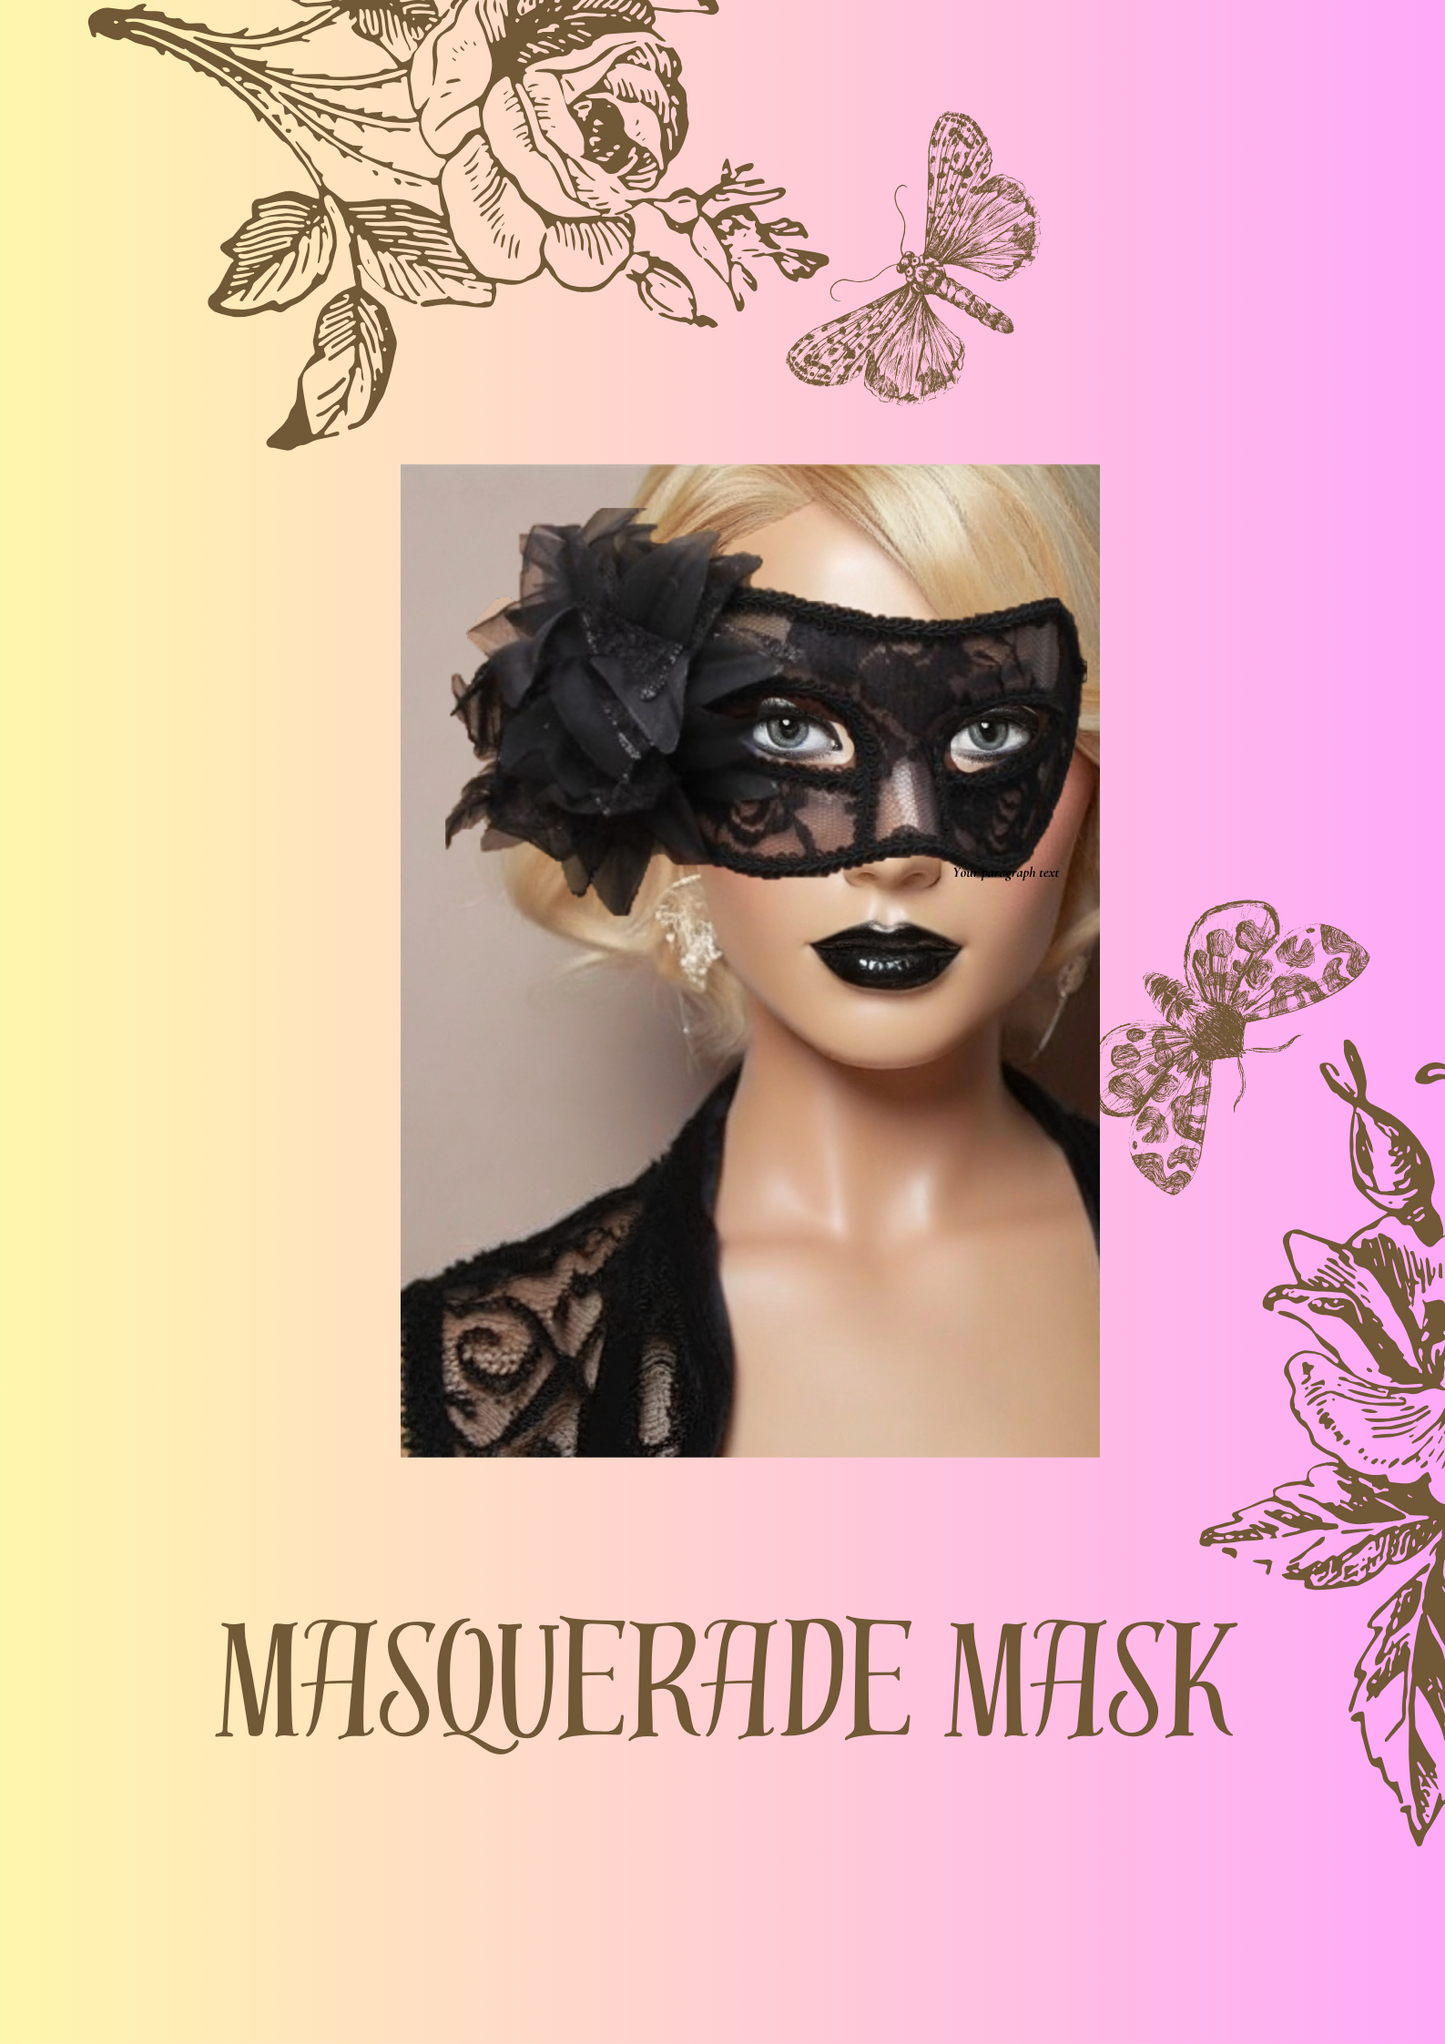 Black Lace Flower Masquerade Mask - Elegance in Every Petal